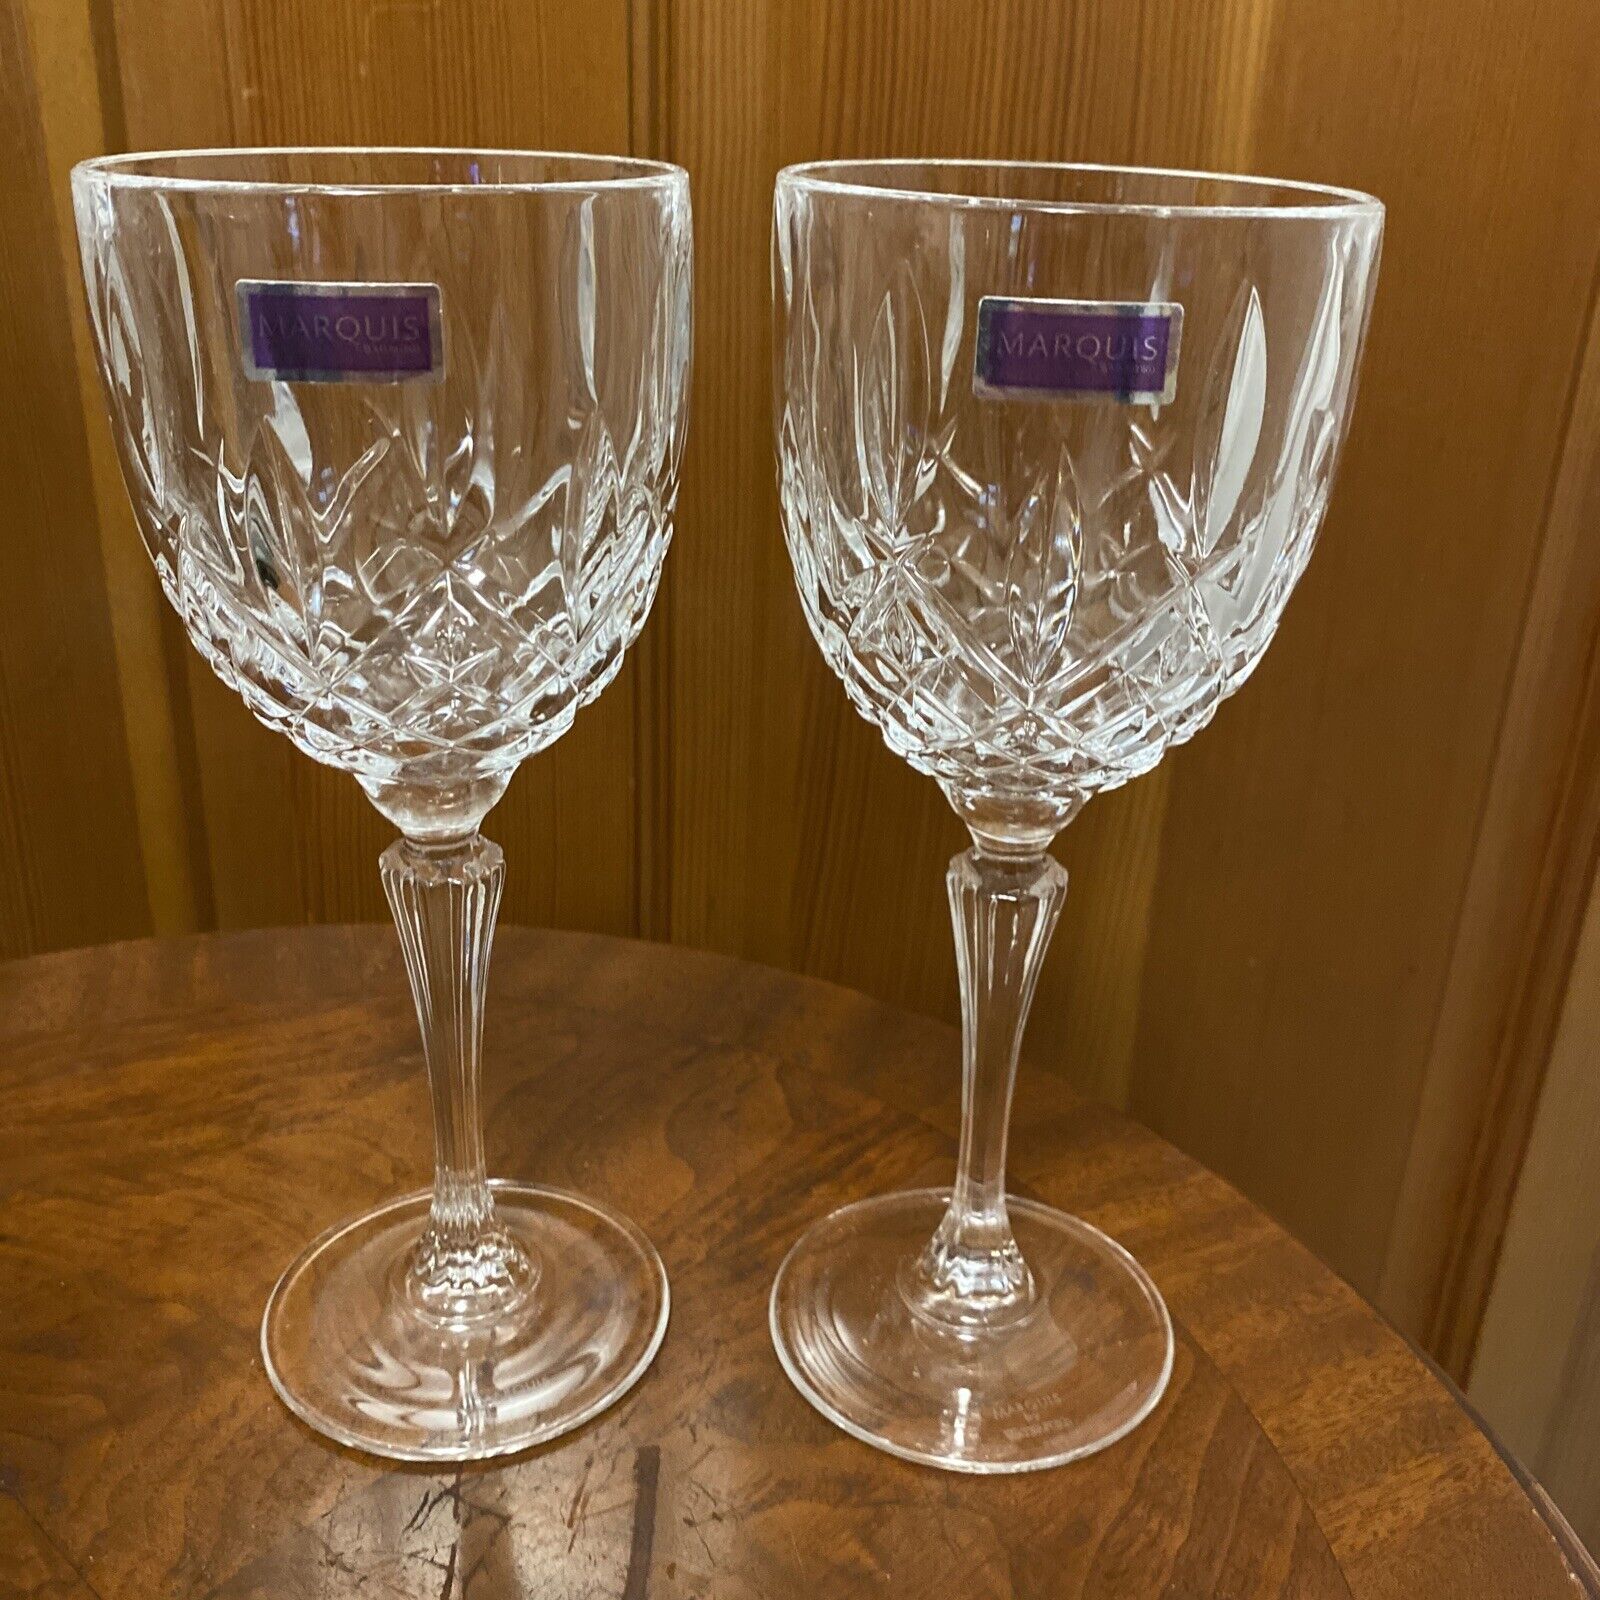 2 - Waterford Marquis Markham Crystal Wine Water Glasses Goblets Italy 8.5” New